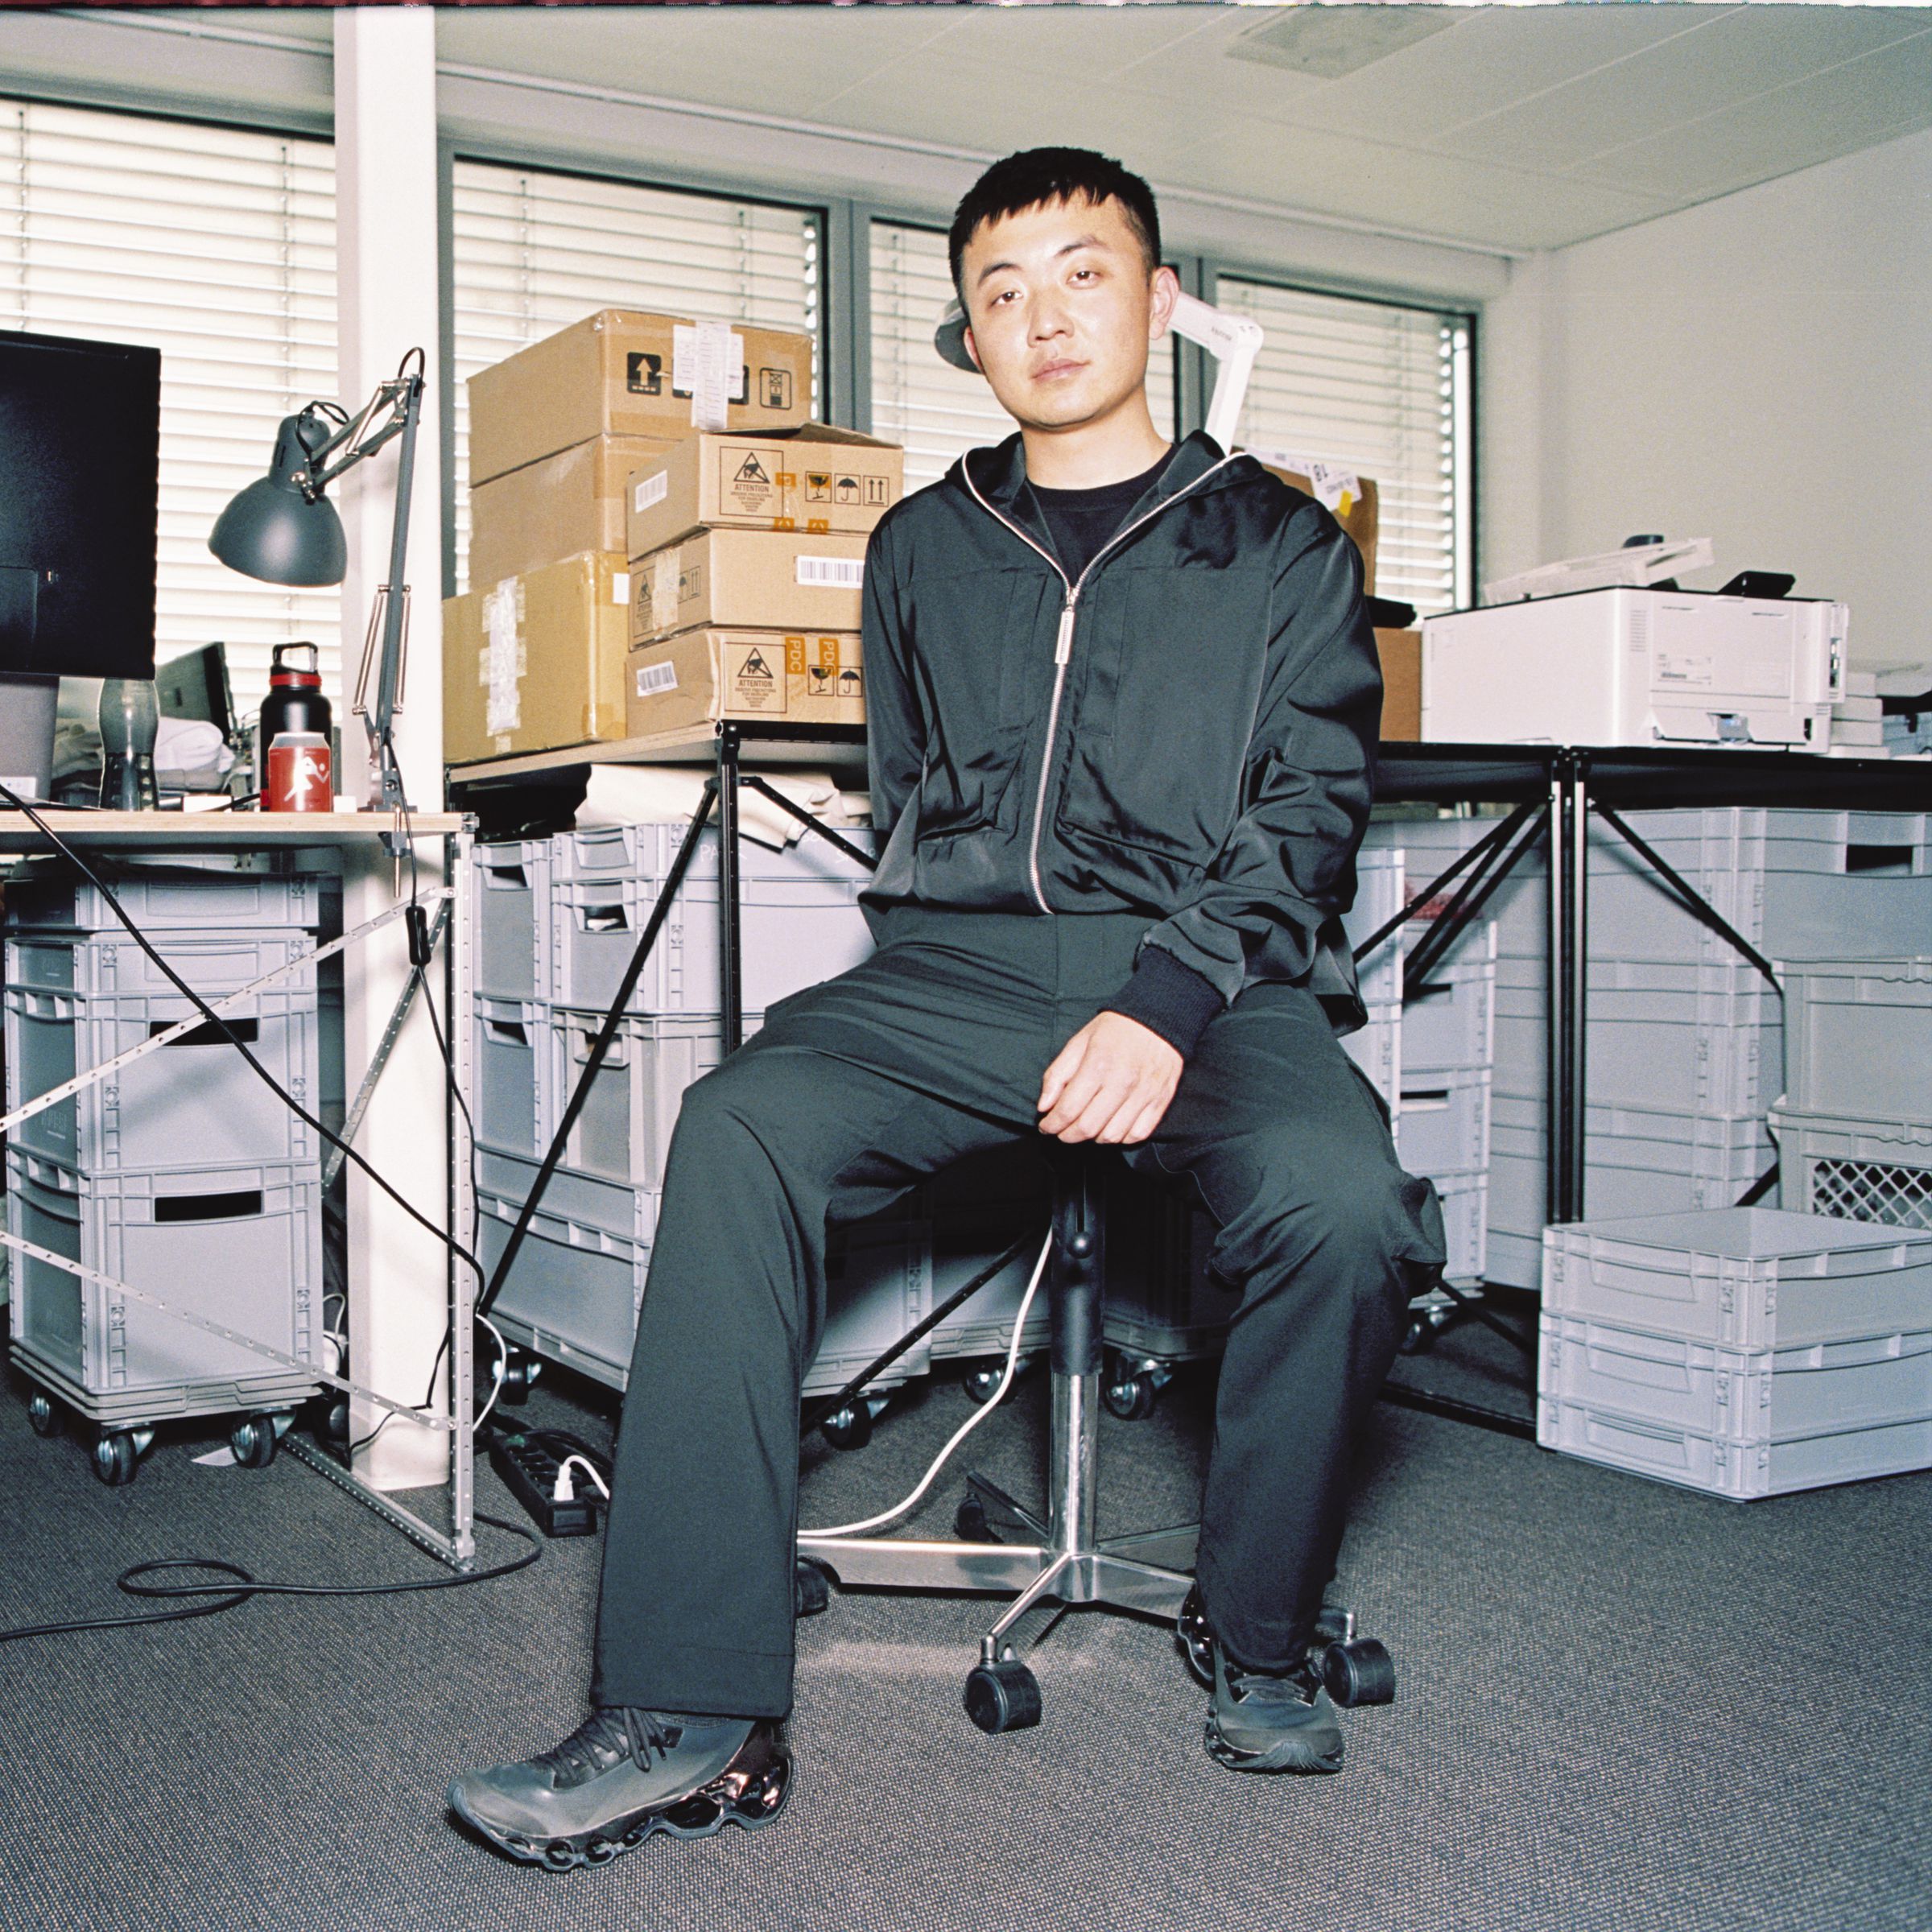 Nothing CEO Carl Pei in his office, surrounded by desks, computers, and cardboard boxes.